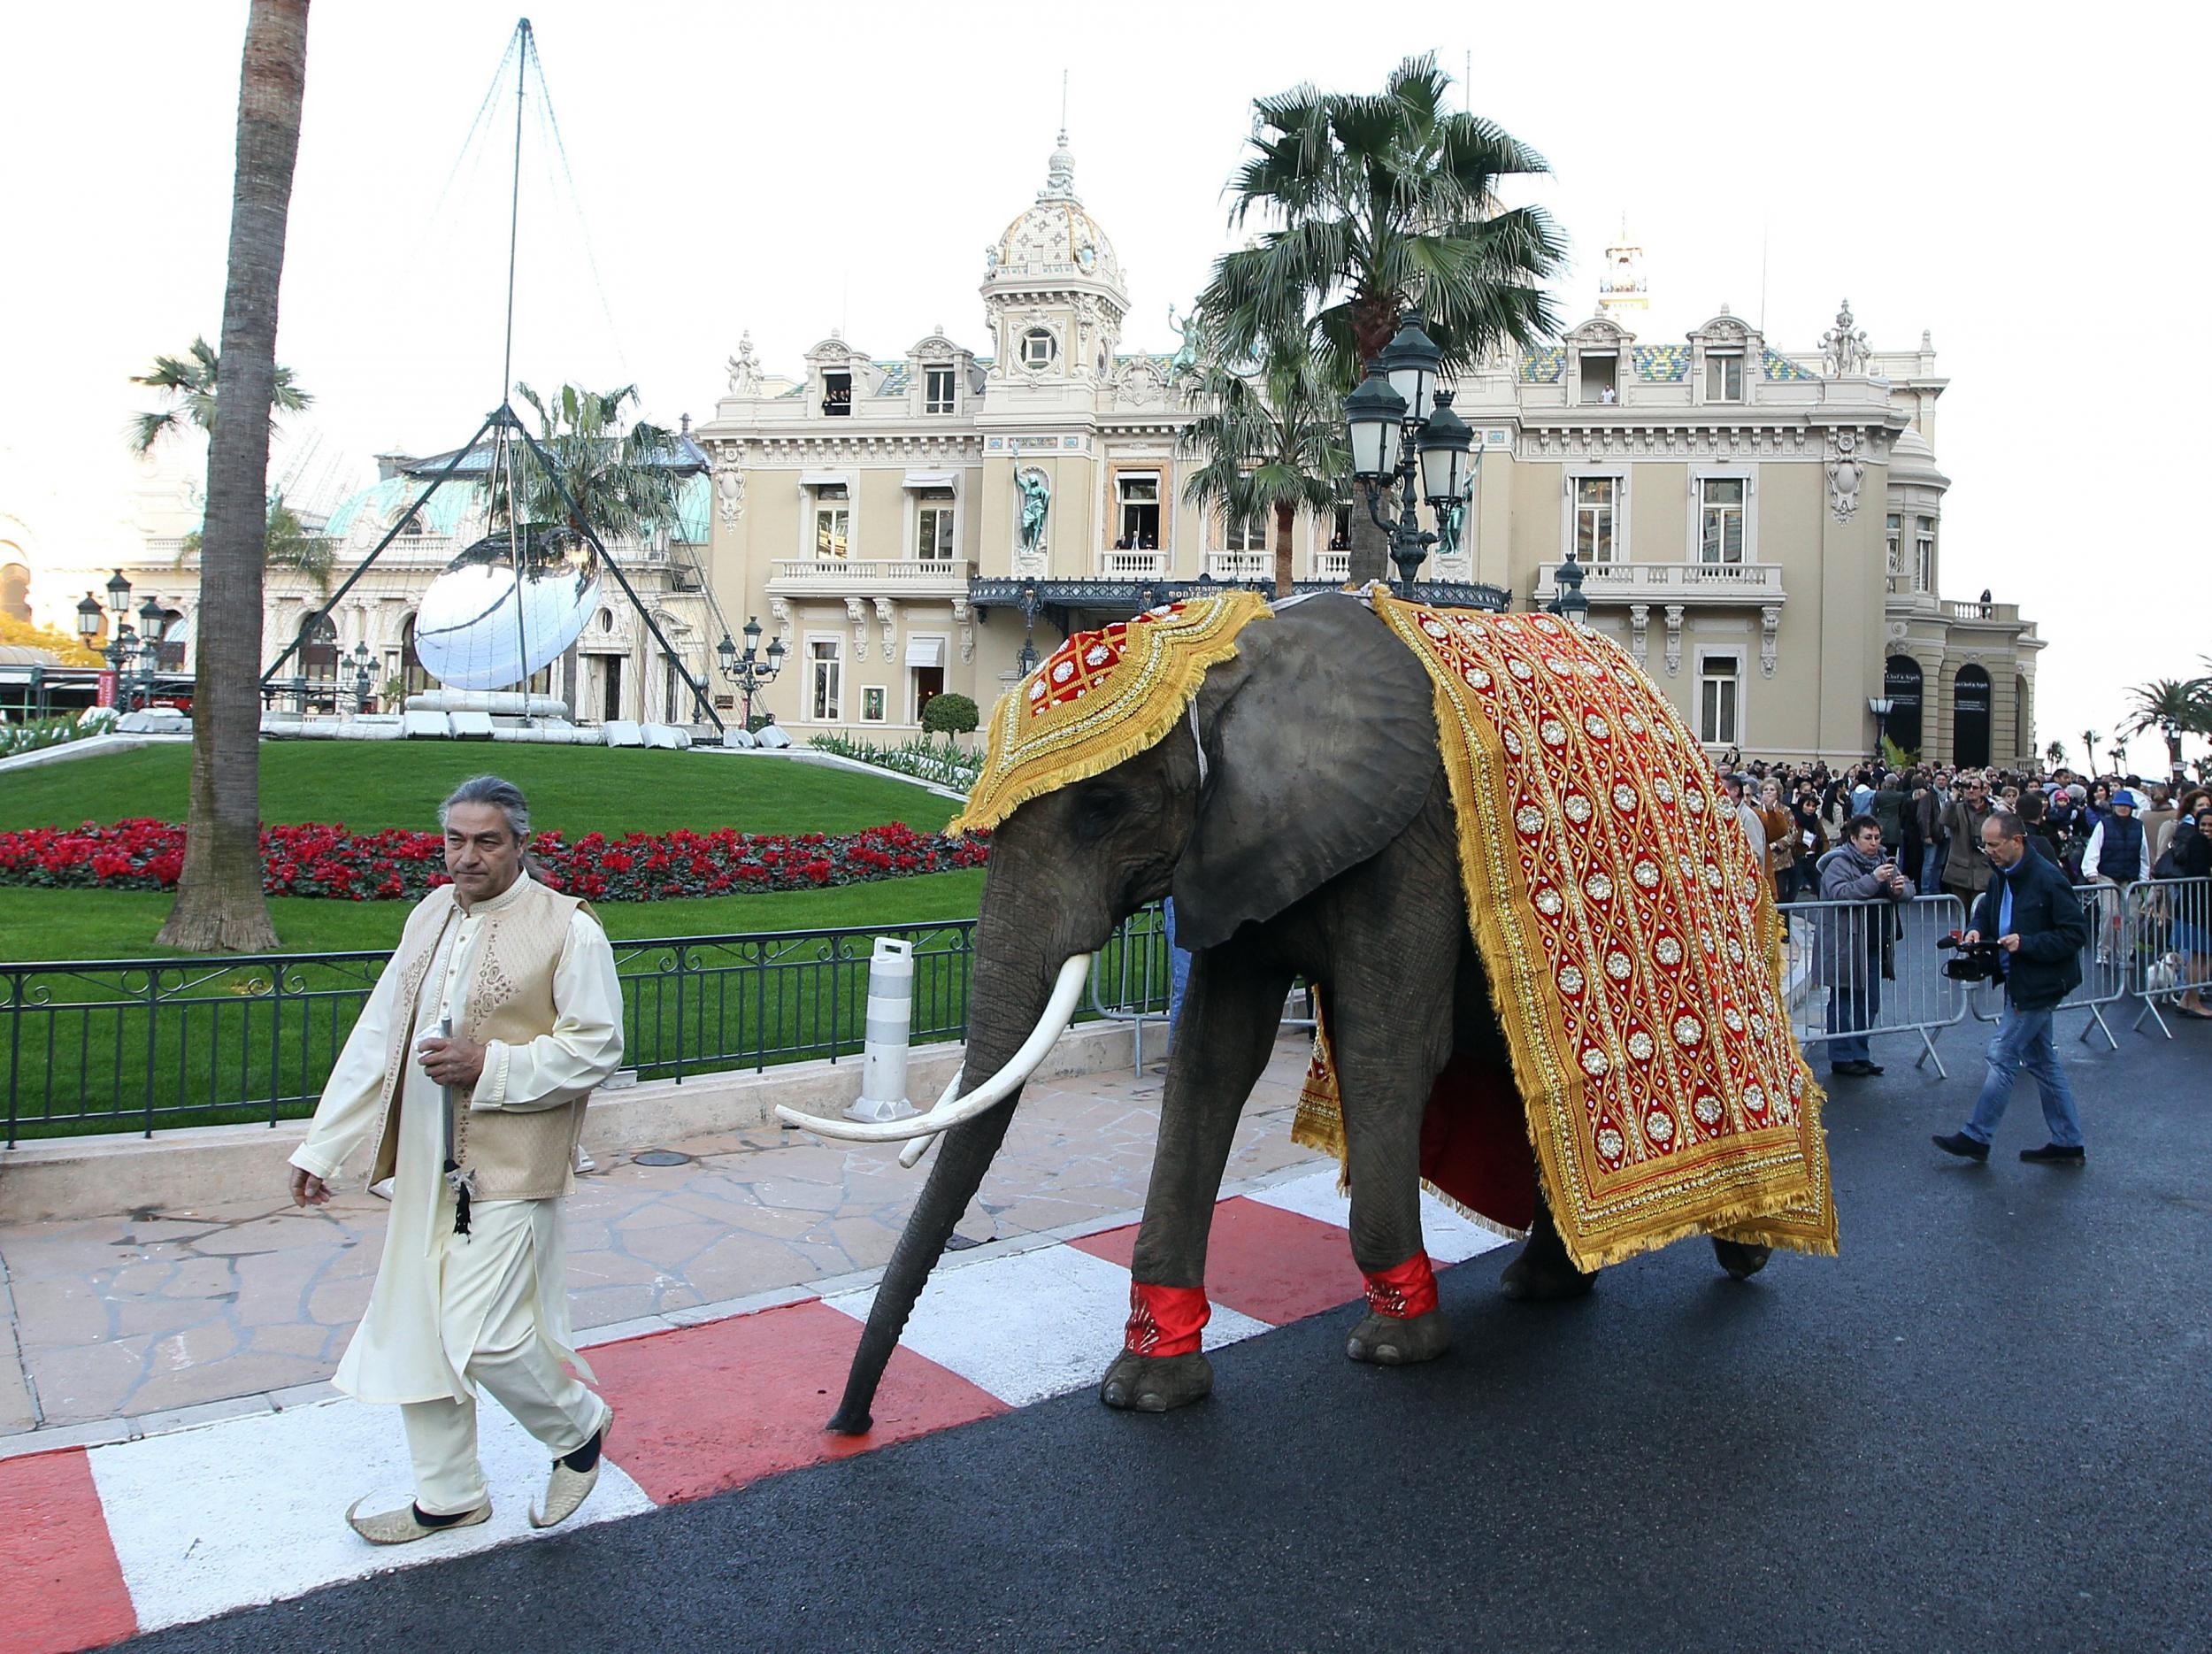 An elephant drafted in for a wedding in Monaco. Nigel turned down a similar request.